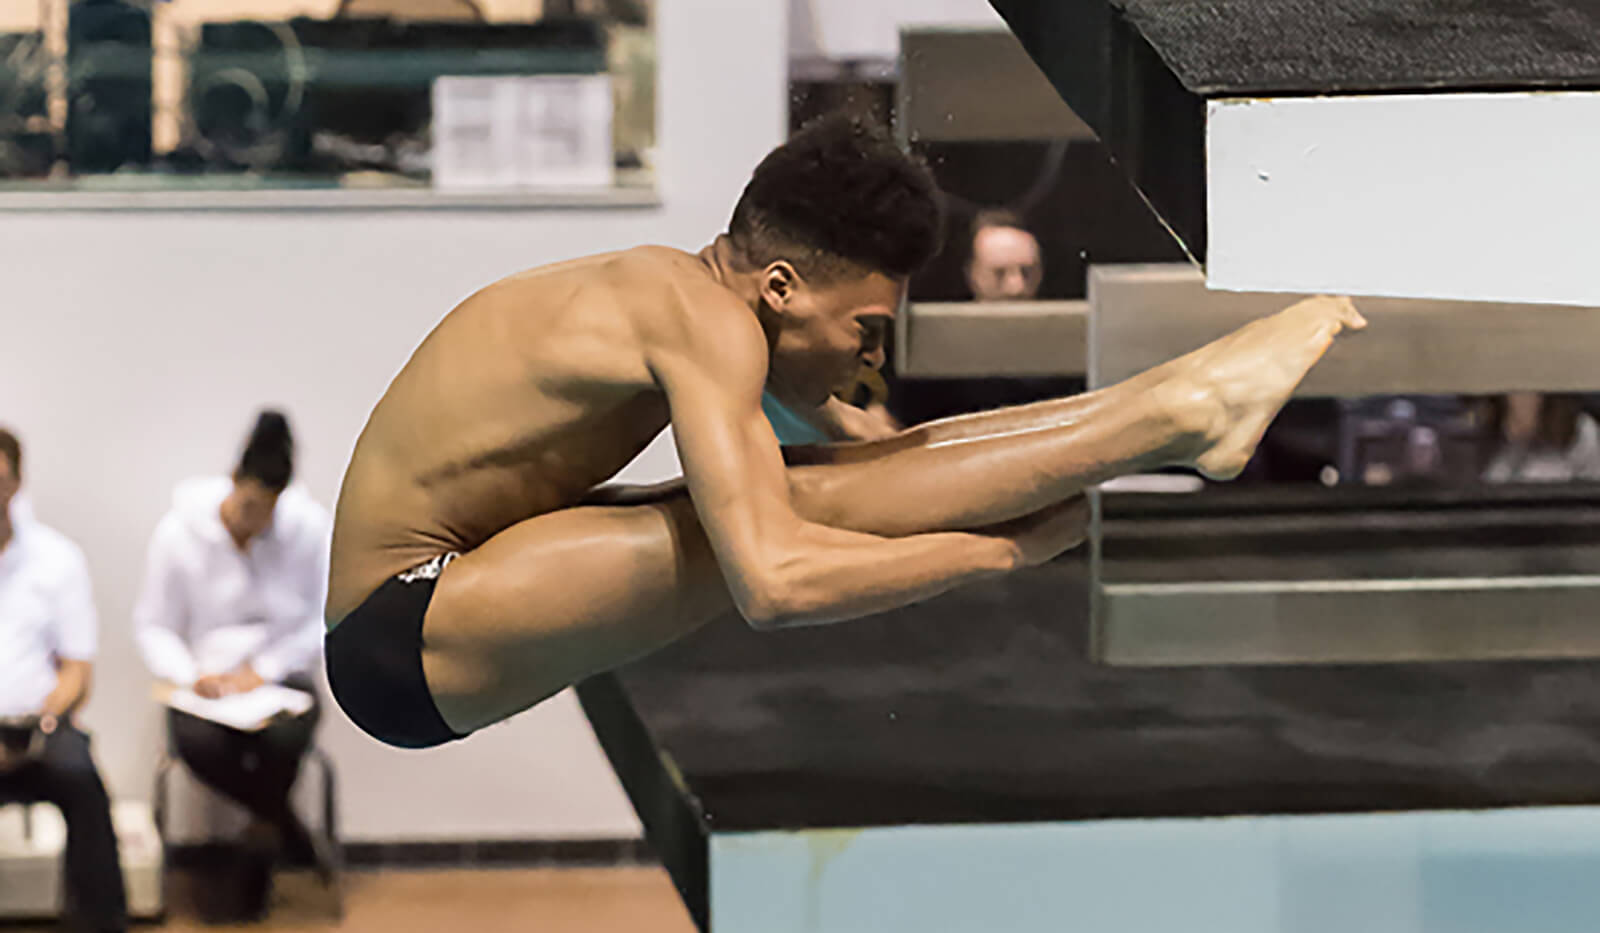 Fofana breaks Canadian age group record at 2018 Junior Elite Nationals